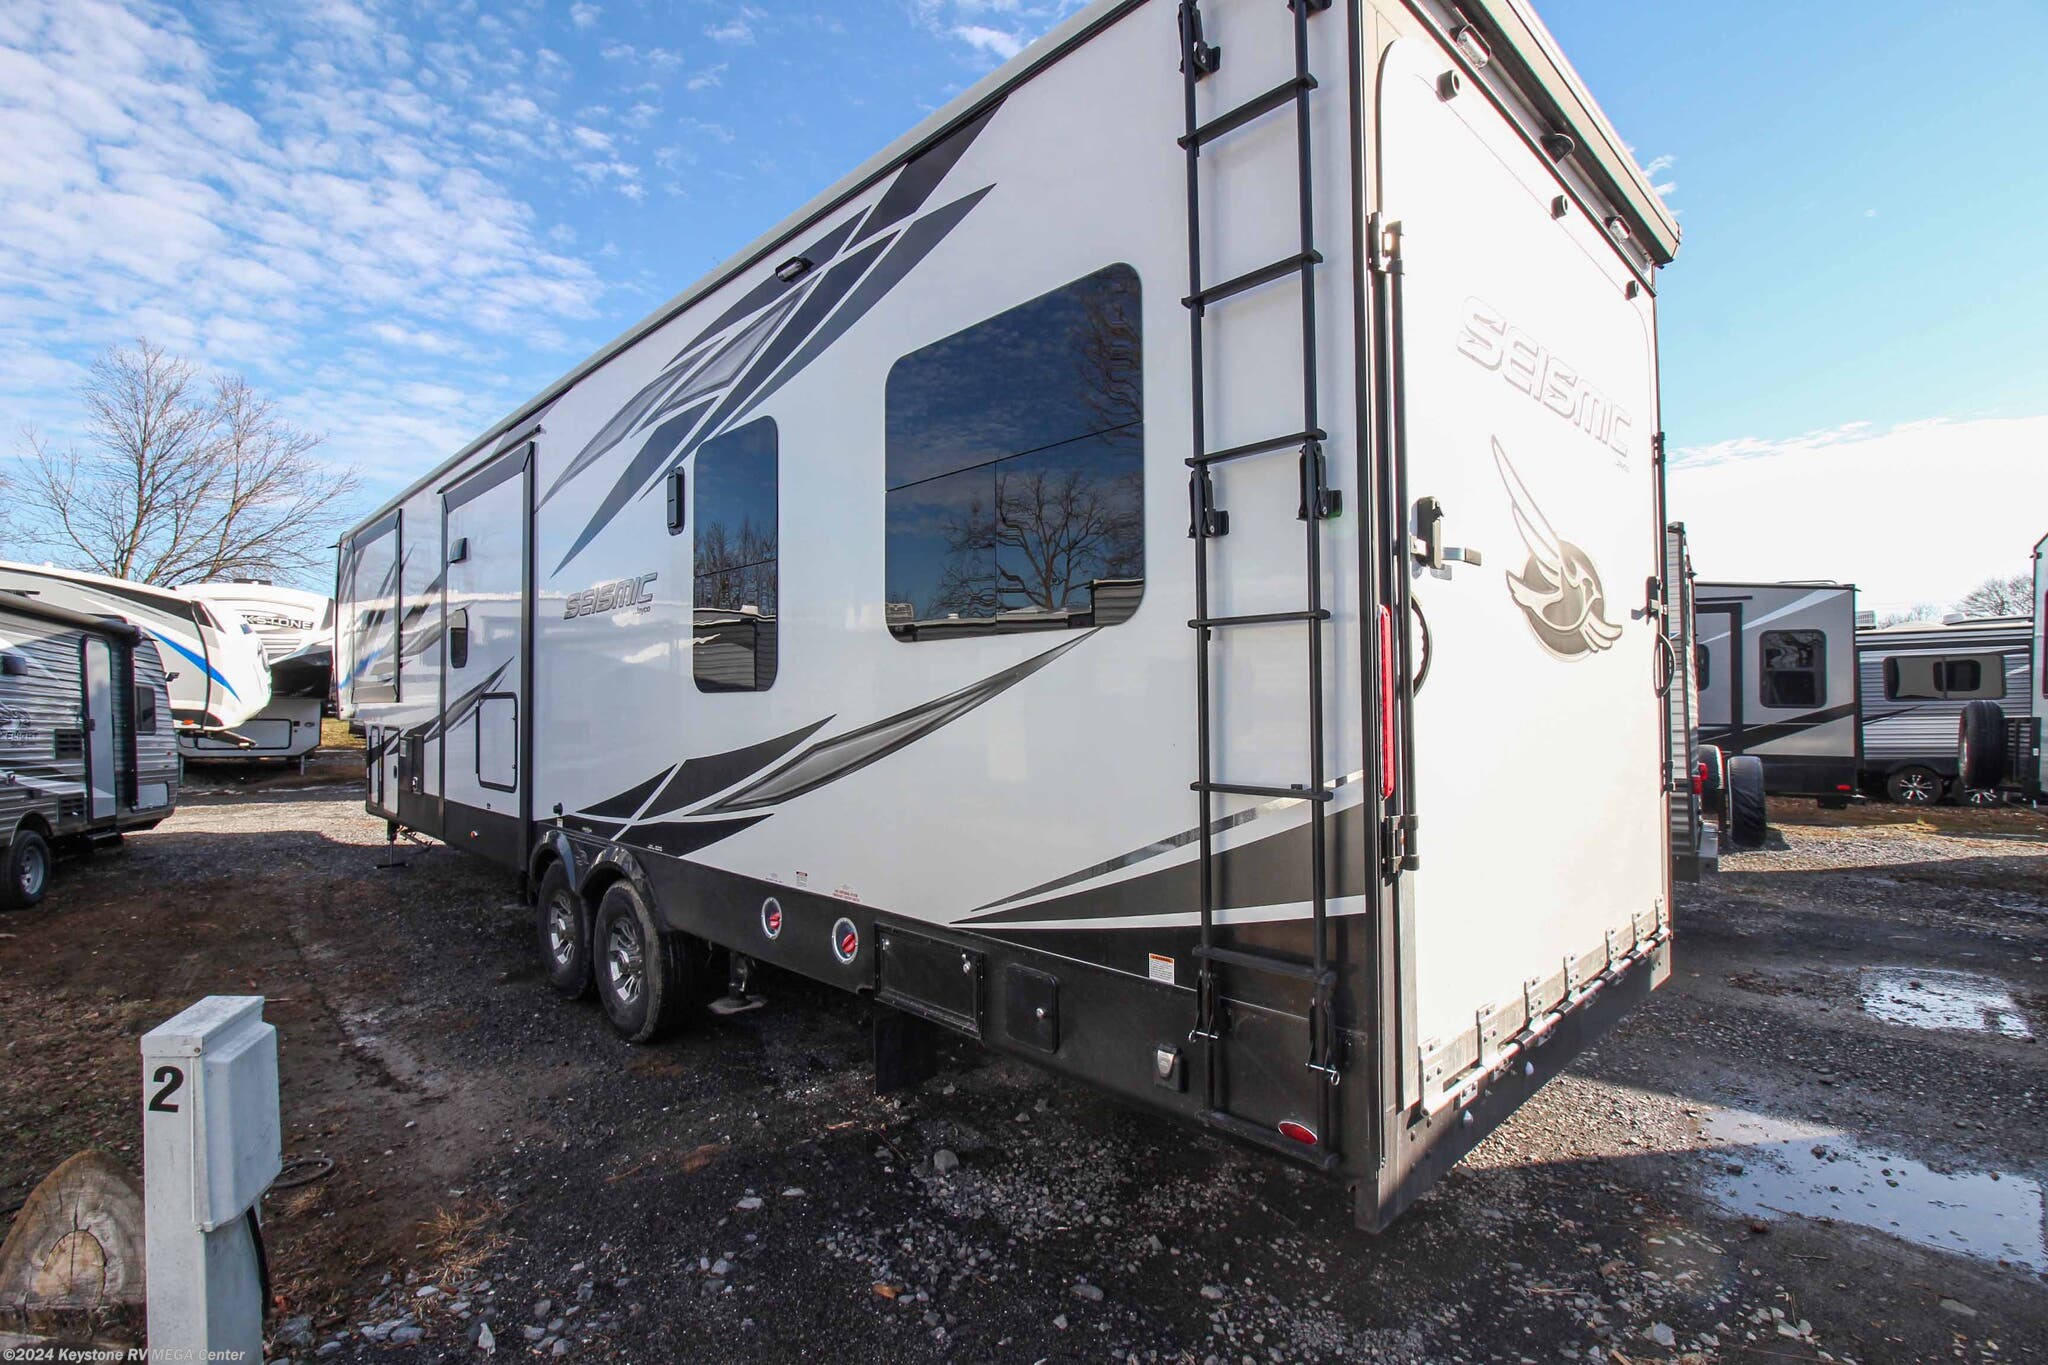 2020 Jayco RV Seismic 3512 for Sale in Greencastle, PA 17225 | 14752 2020 Jayco Seismic Fifth Wheel Toy Hauler 3512